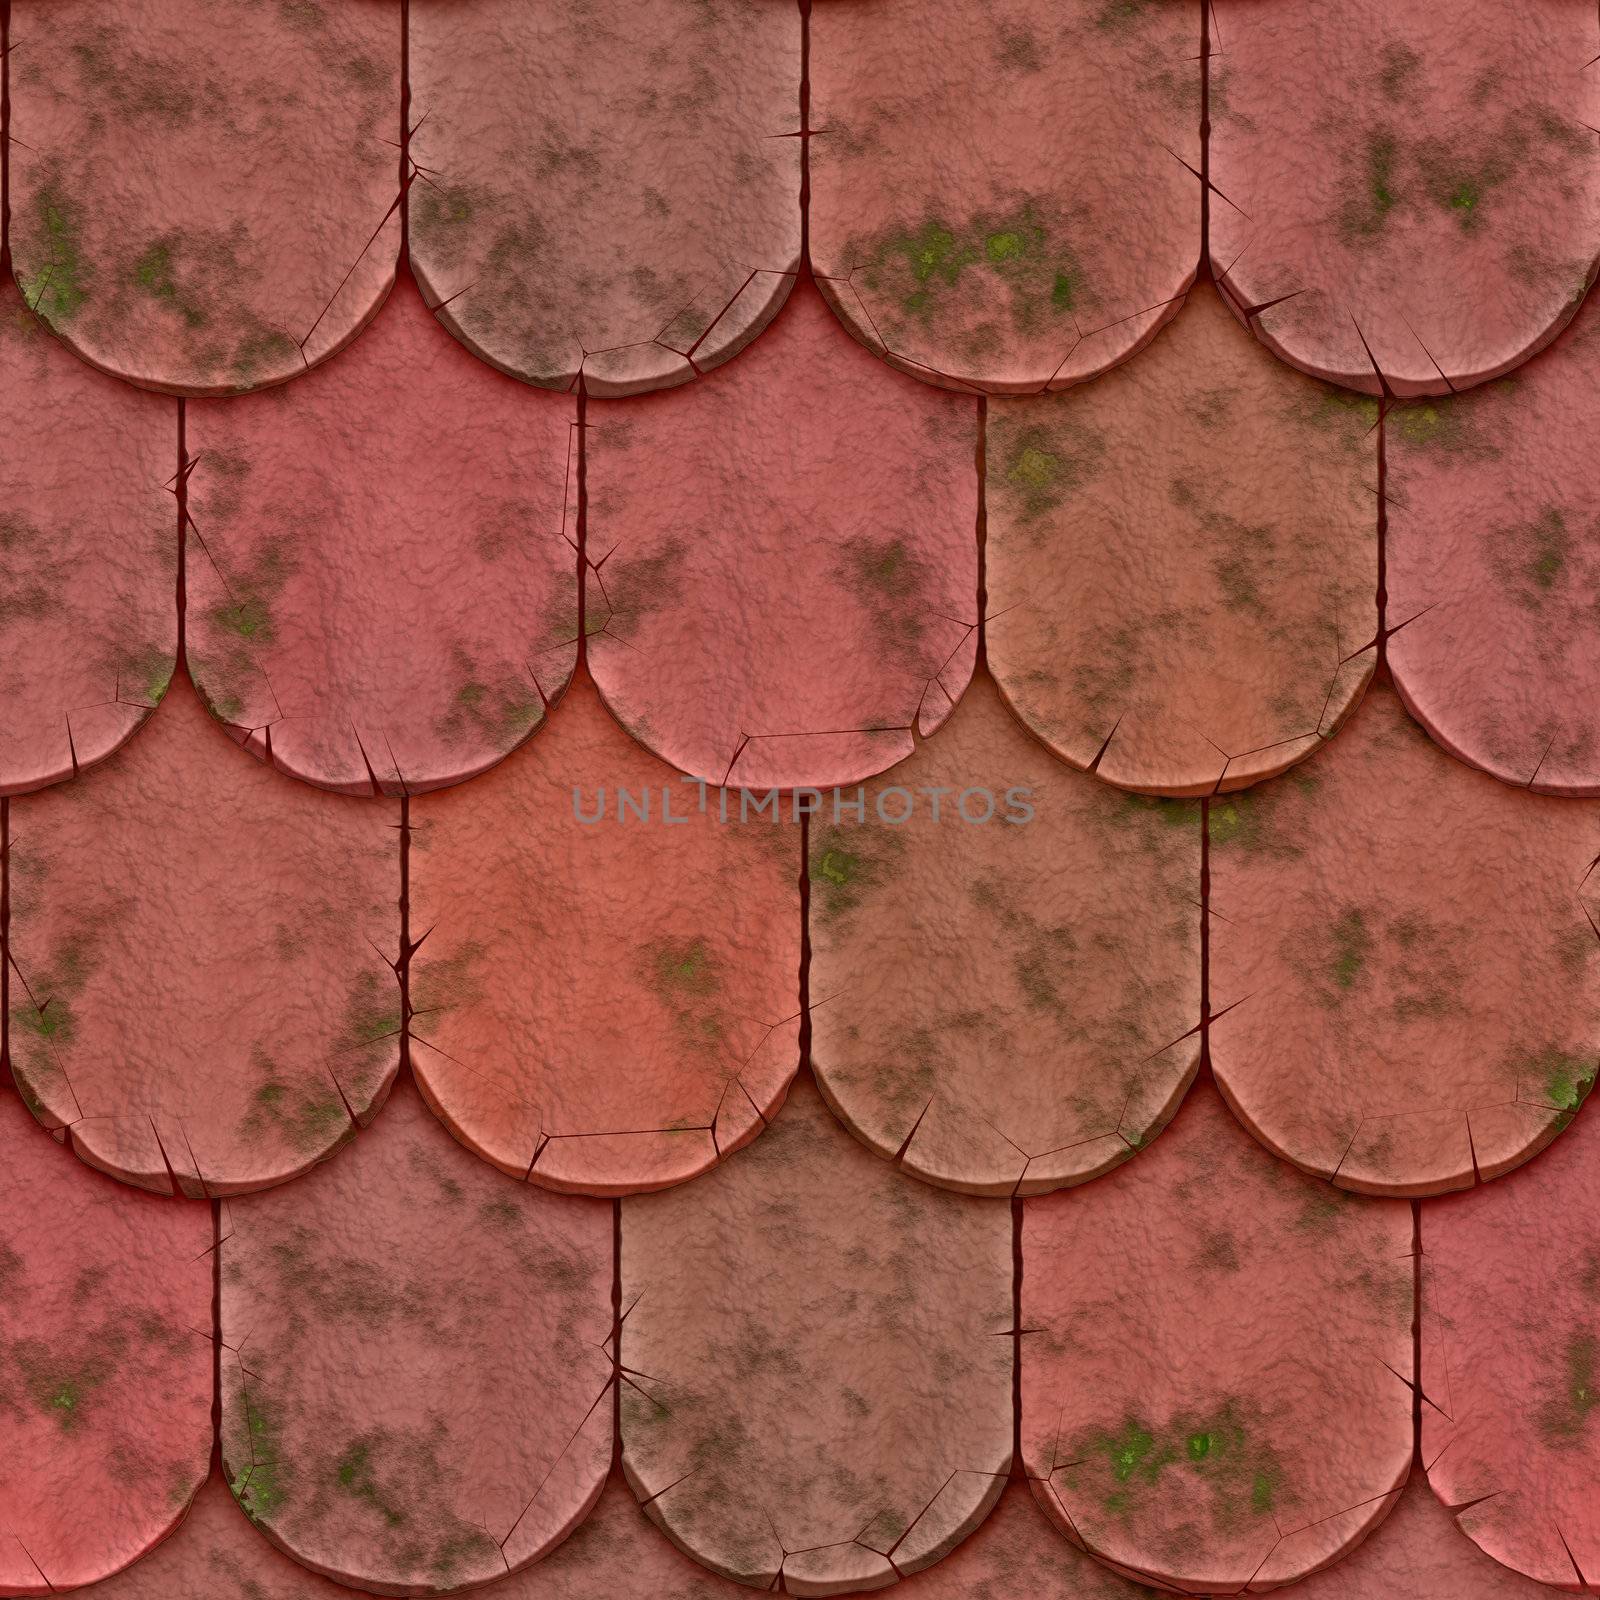 High quality high resolution abstract old shingles background